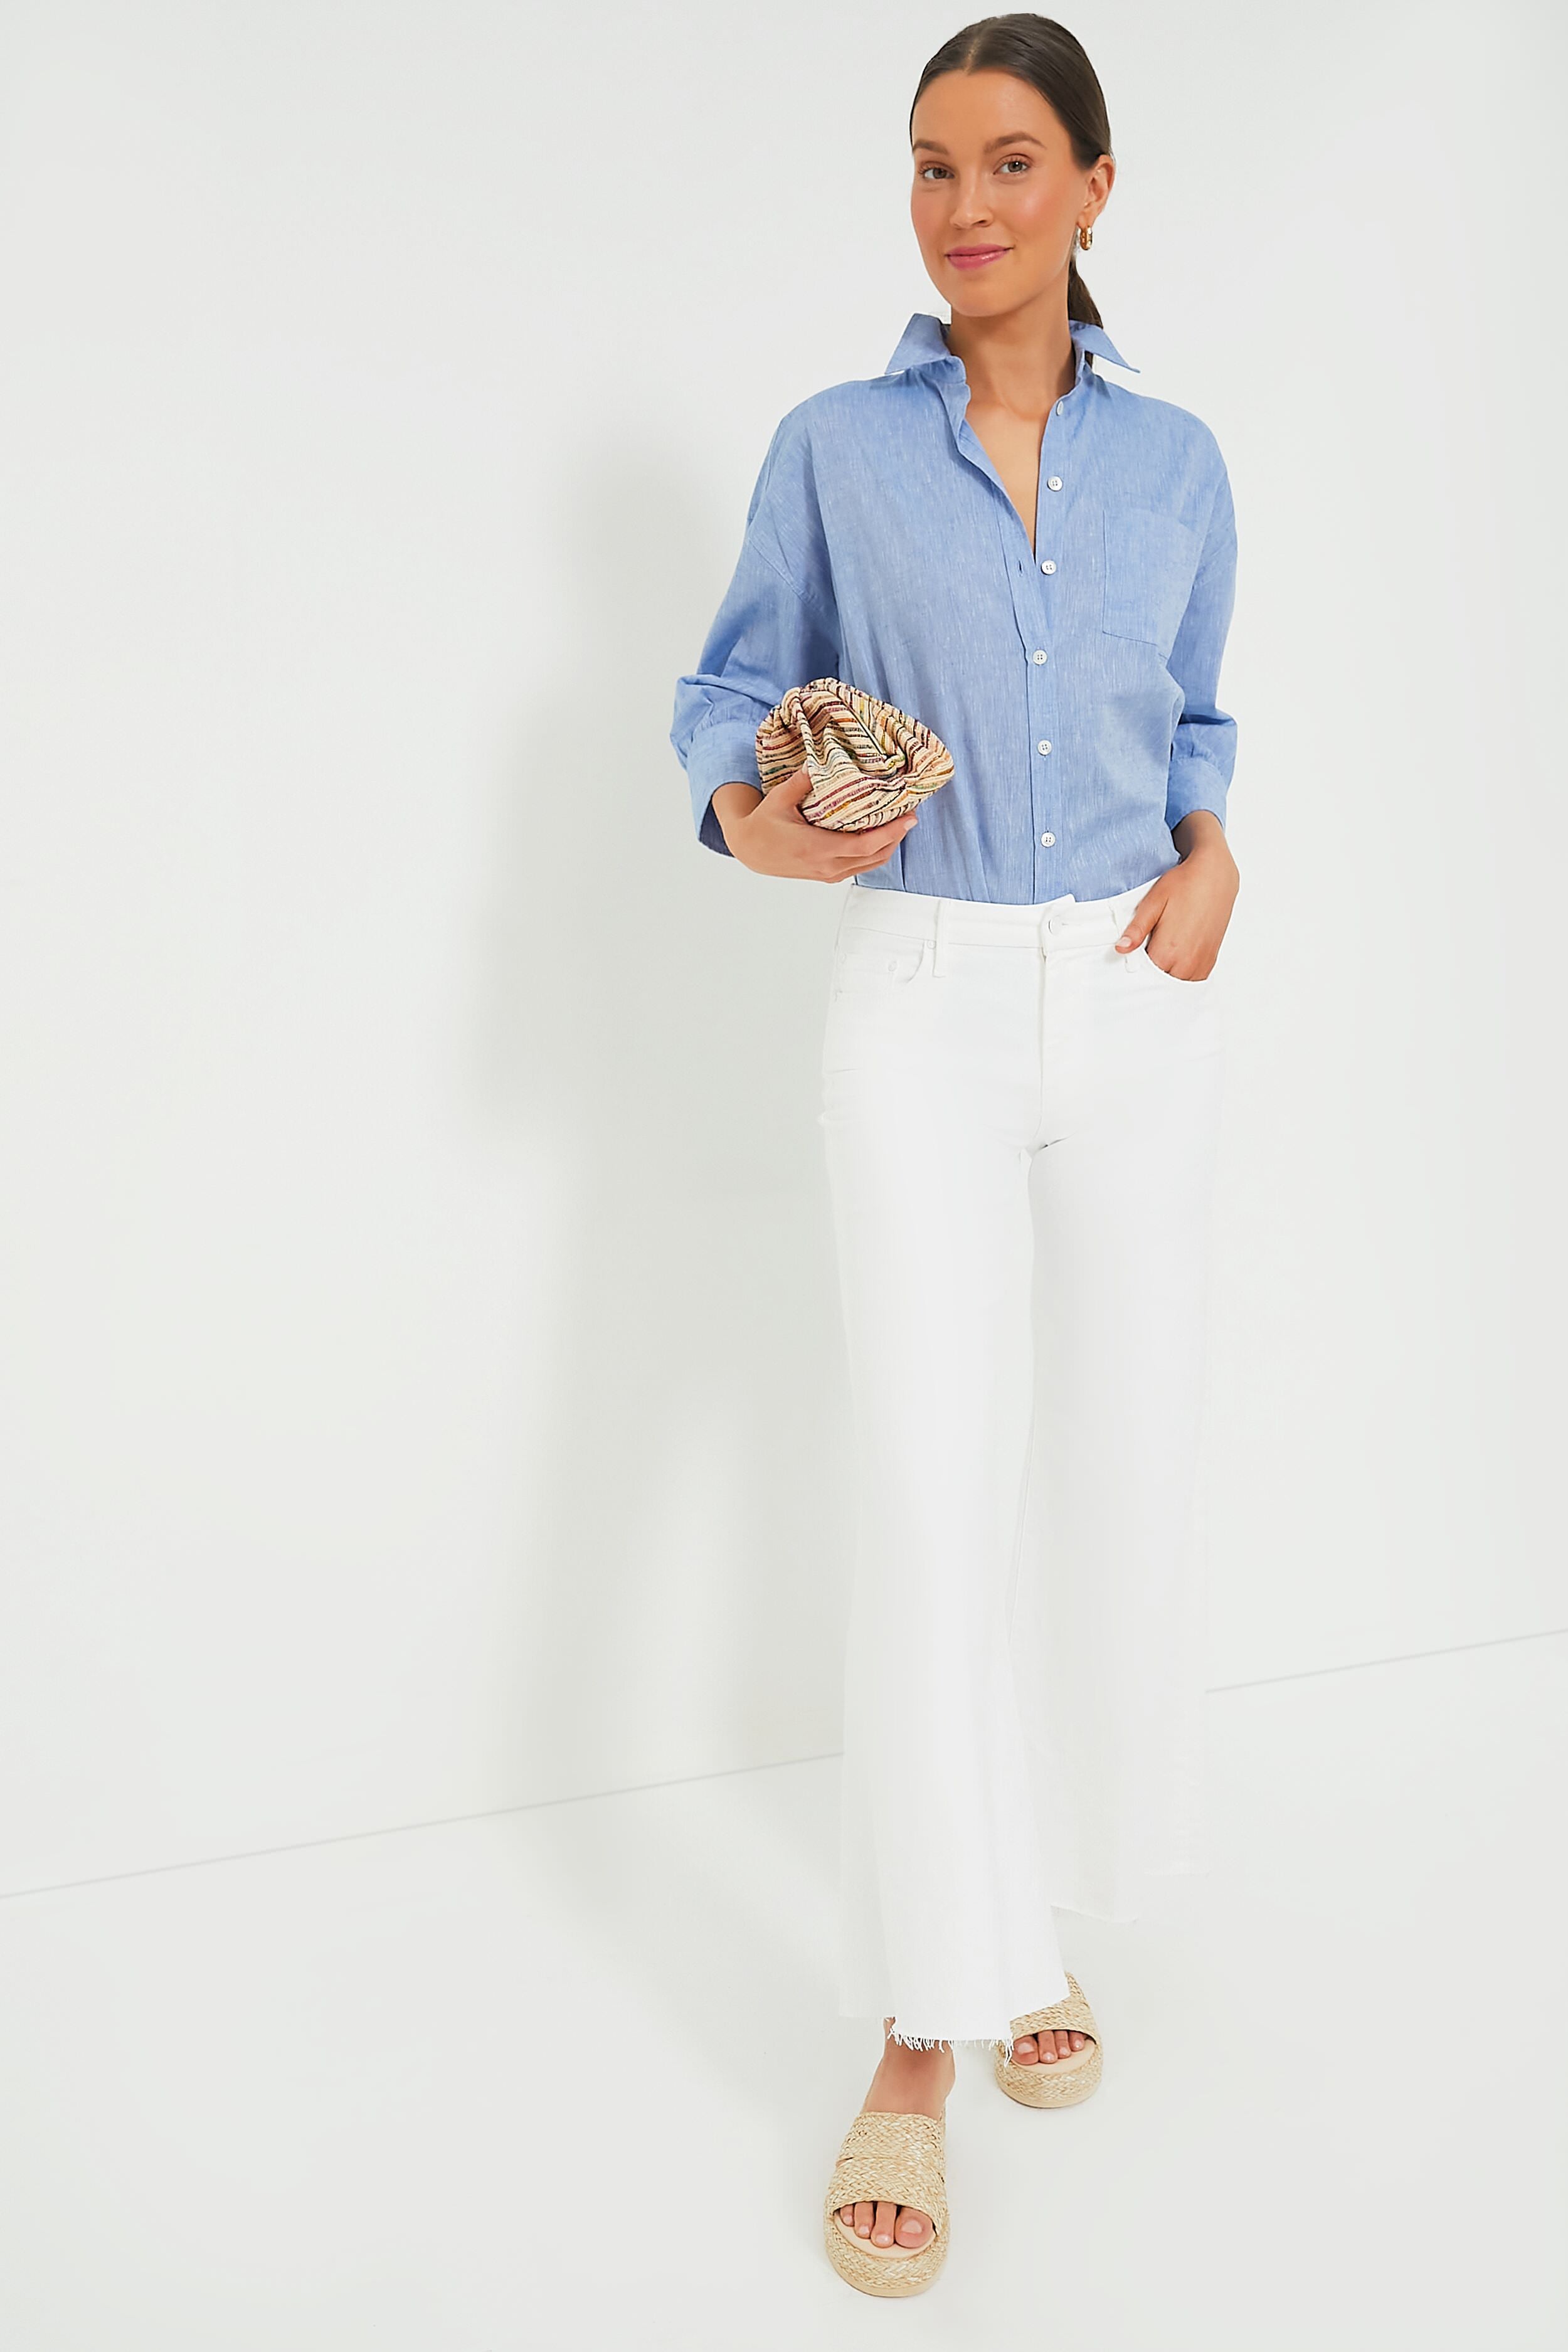 How to Wear a Chambray Shirt - Take It From Nicole